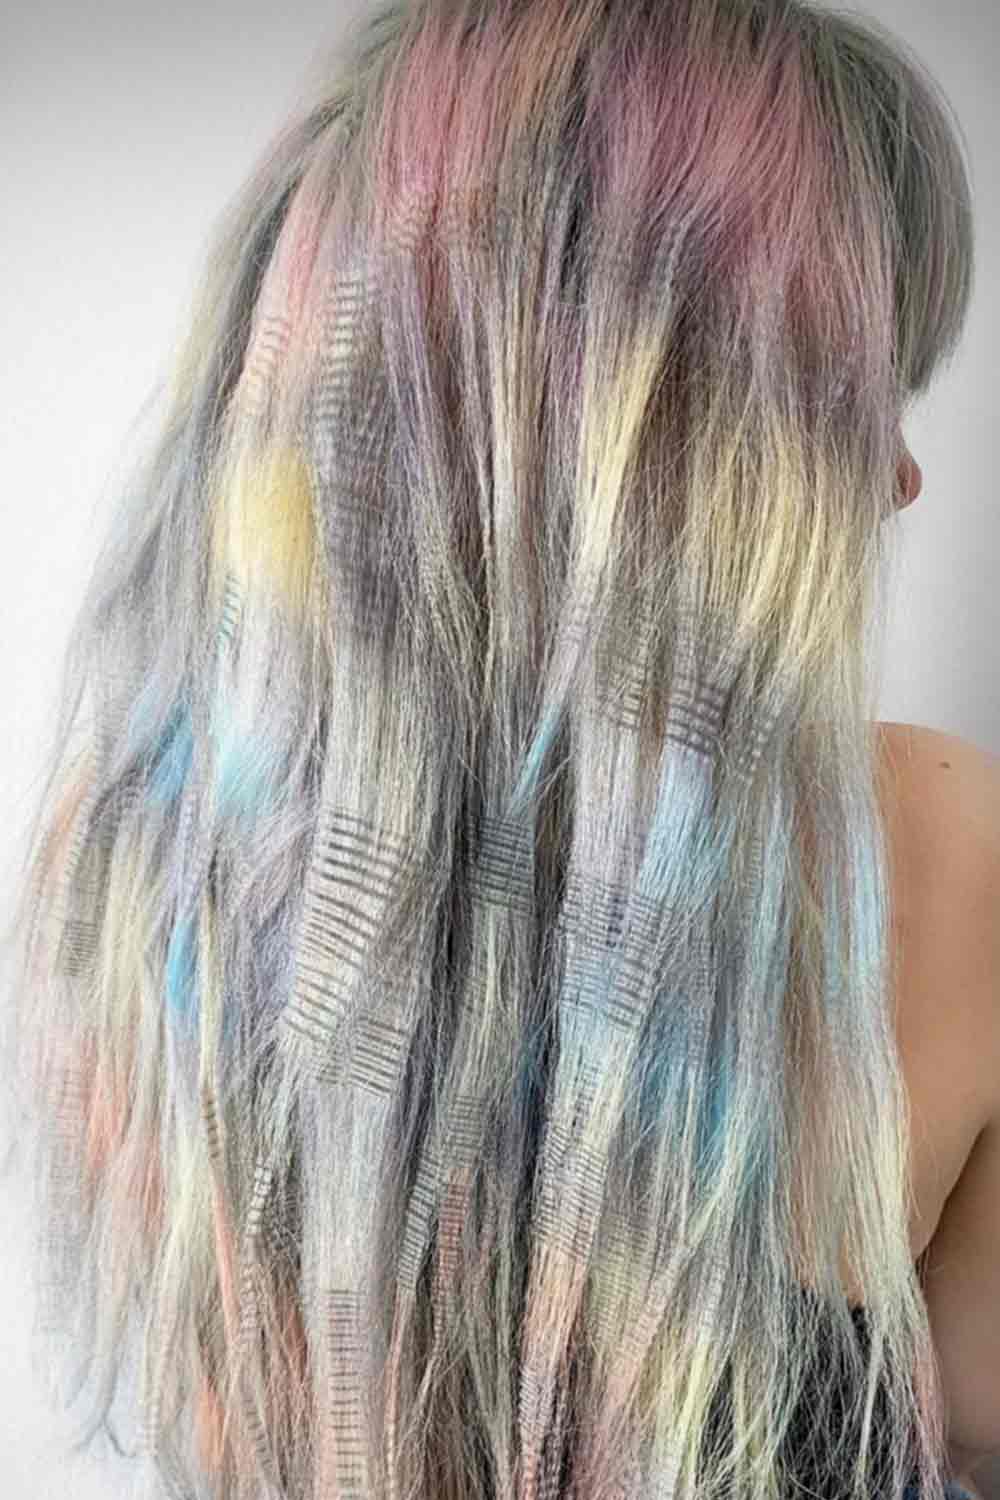 Is Crimped Hair In Style? #greyhair #coloredhair